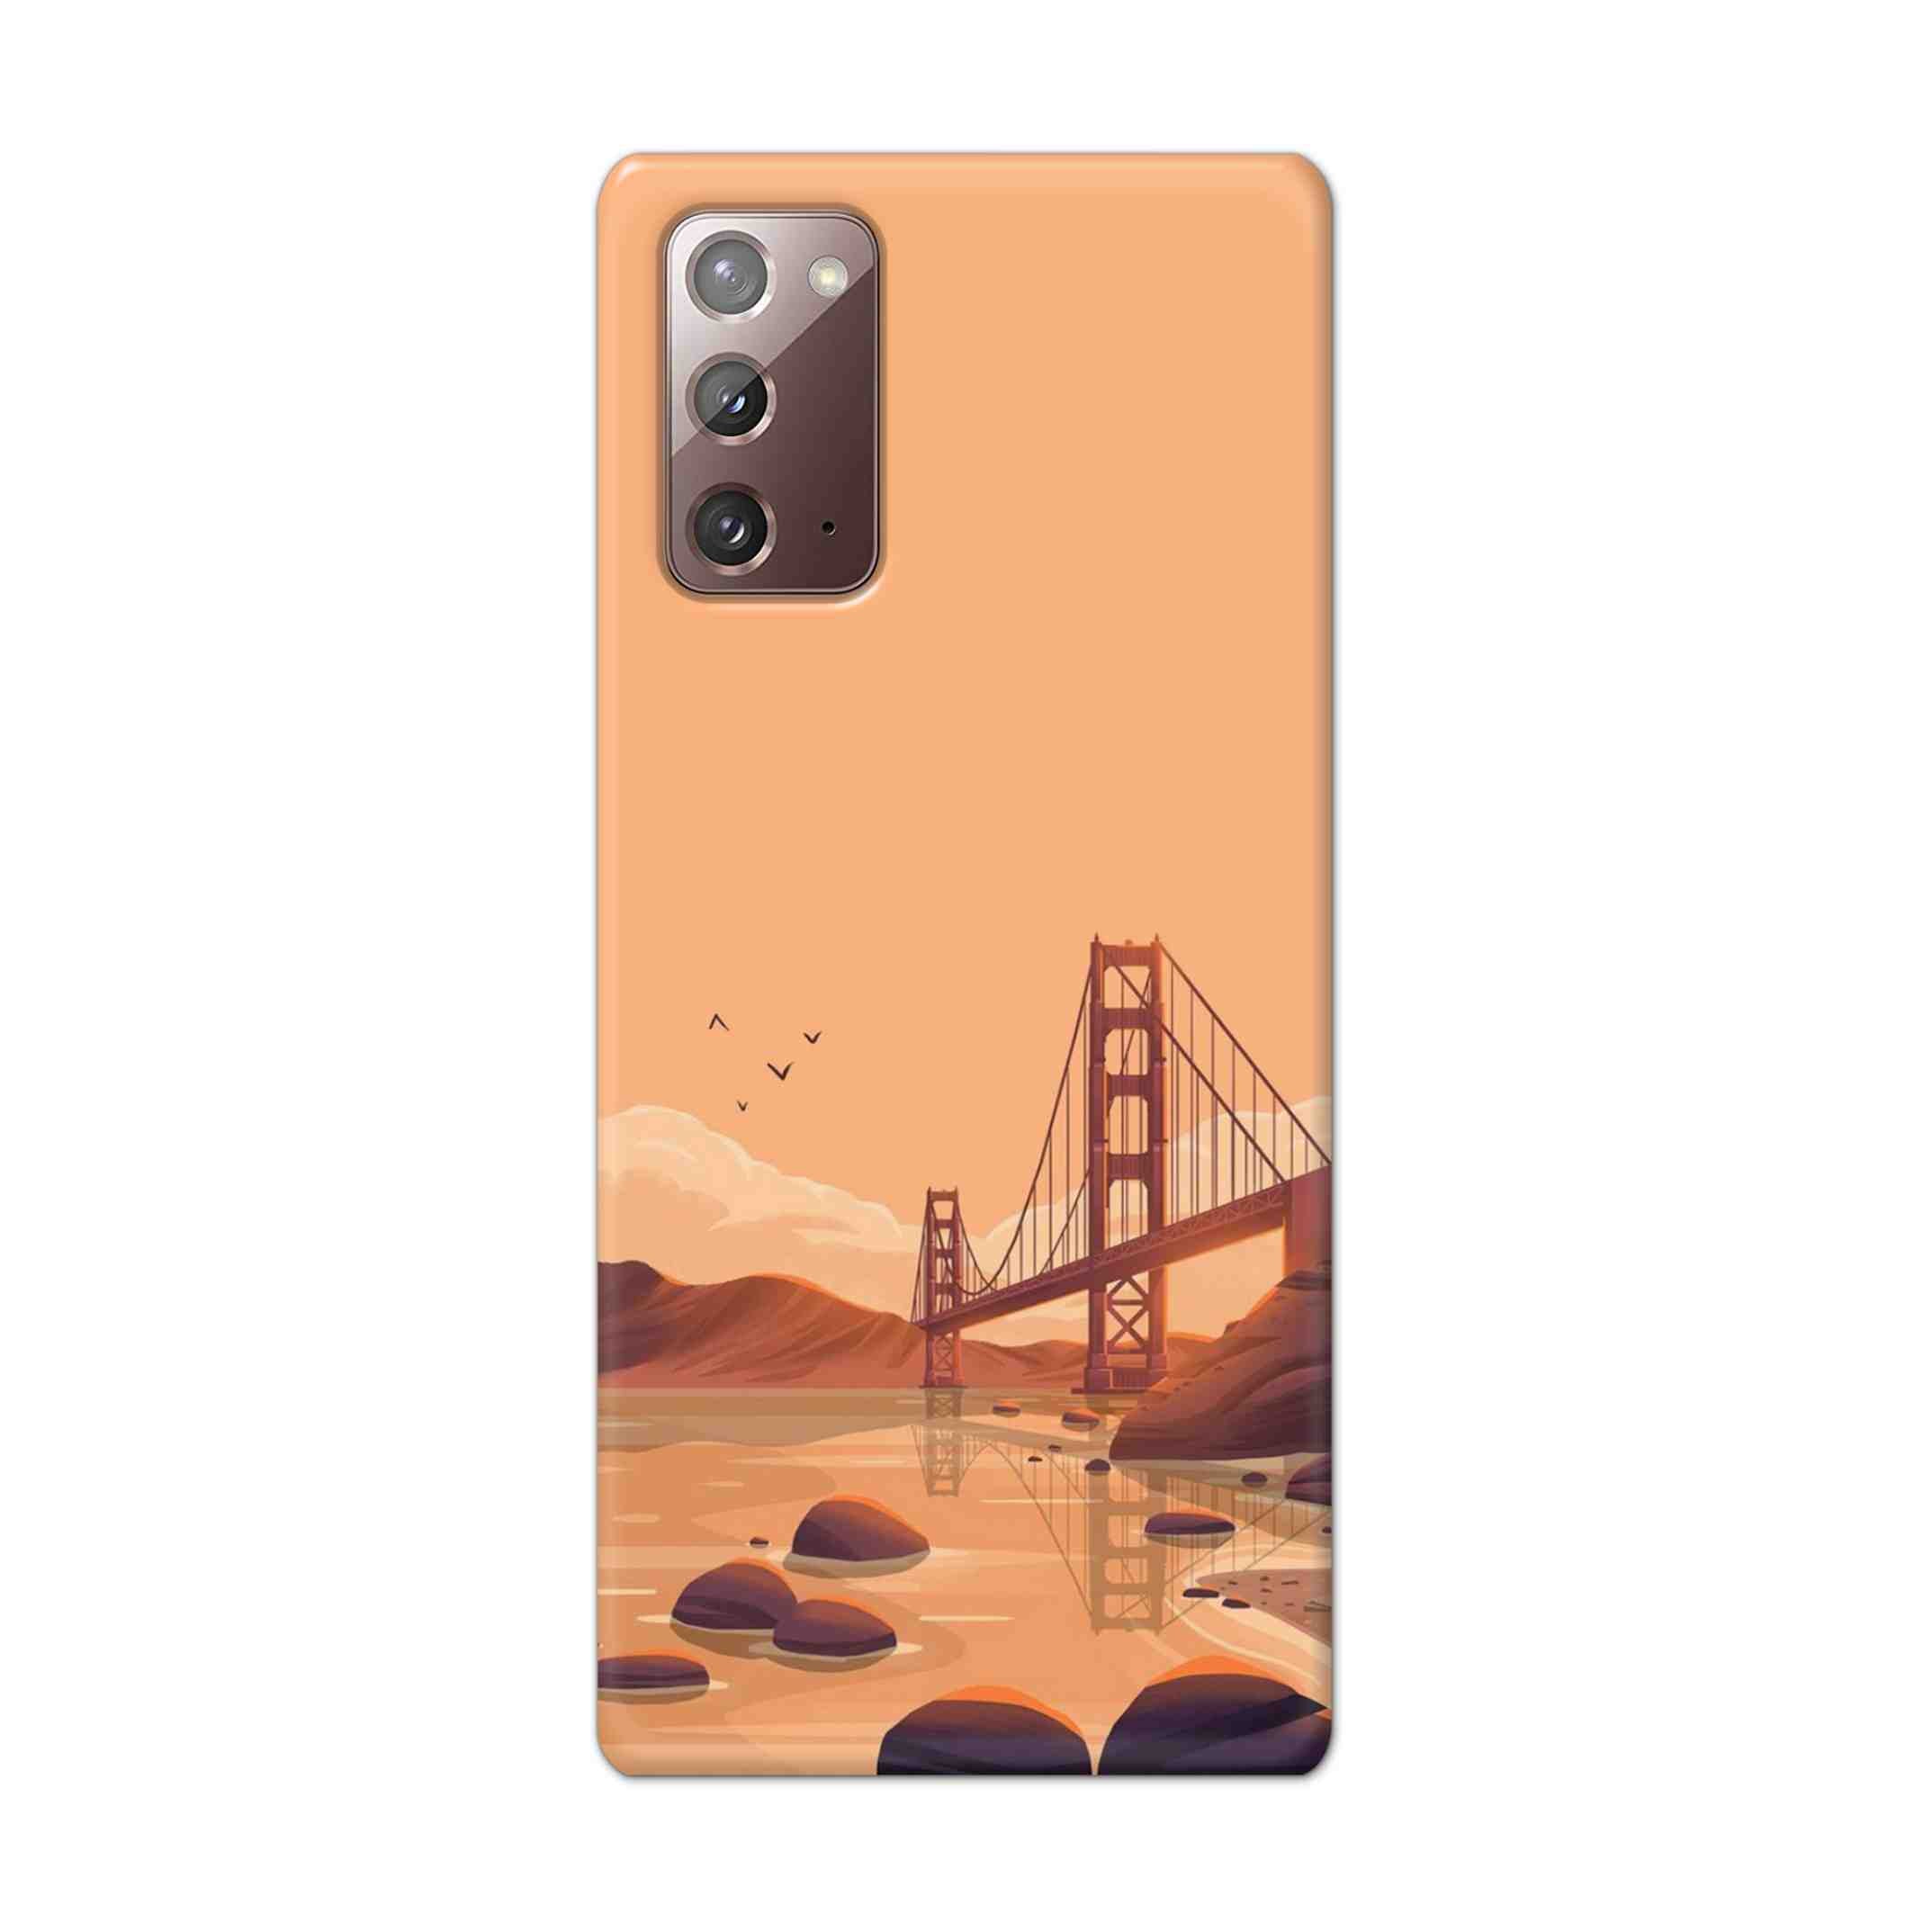 Buy San Francisco Hard Back Mobile Phone Case Cover For Samsung Galaxy Note 20 Online